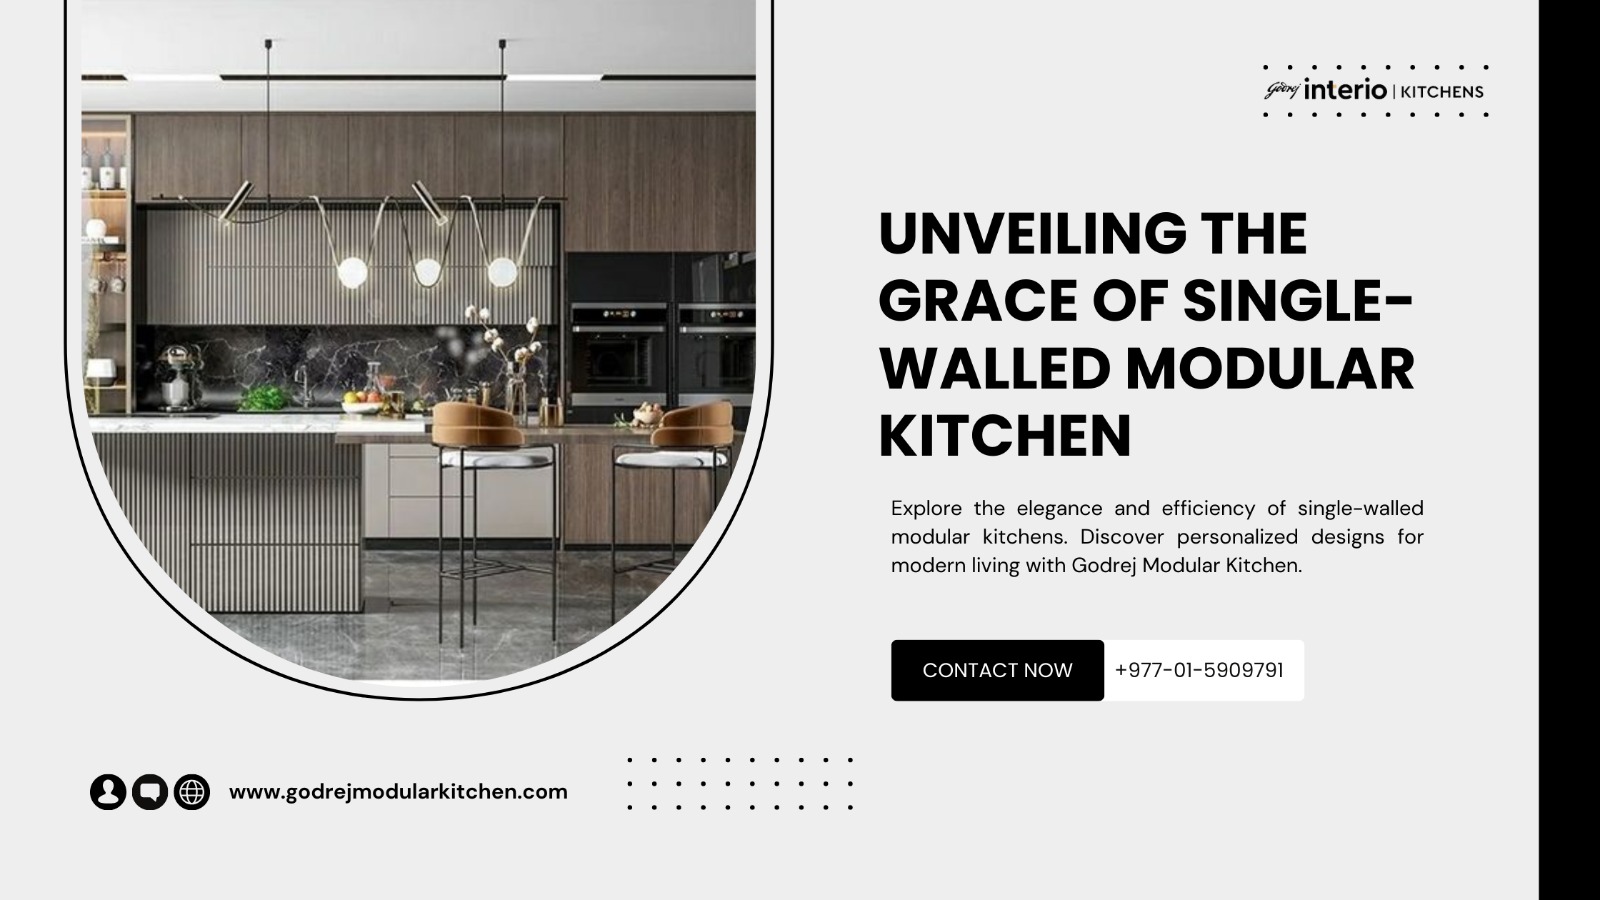 The Ultimate Elegance: Unveiling the Grace of Single-Walled Modular Kitchen